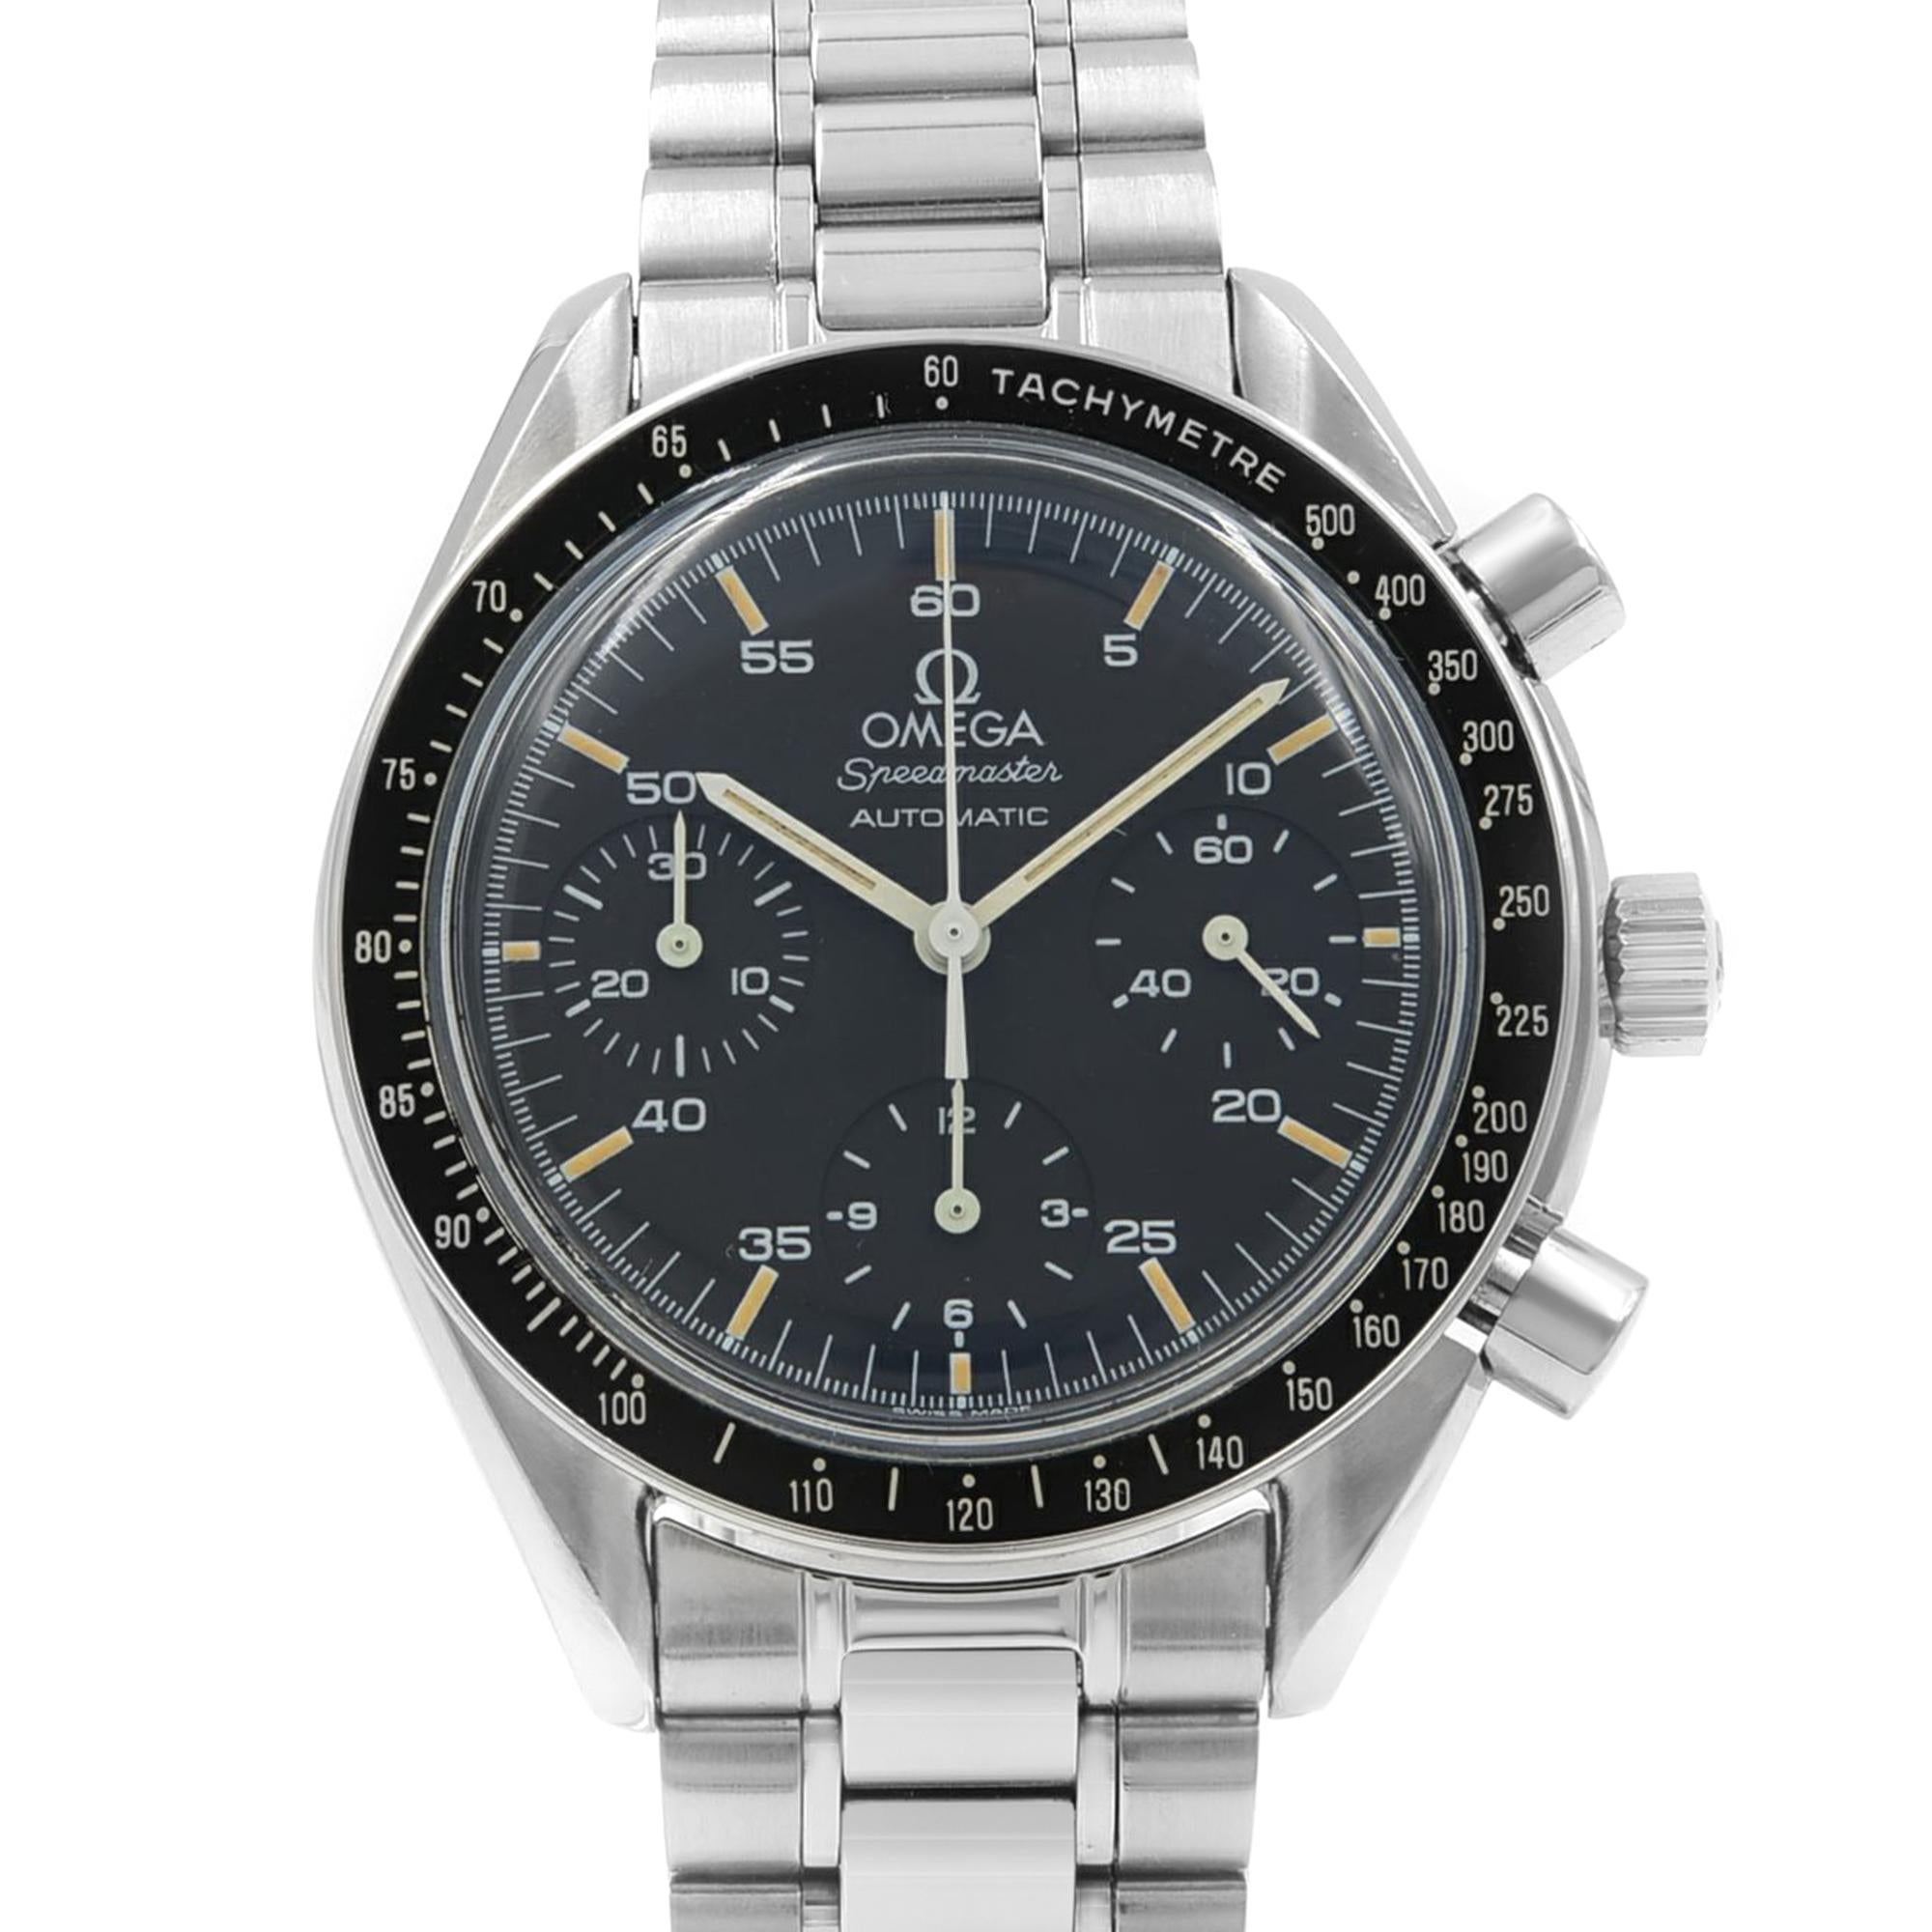 Pre Owned Omega Speedmaster 39mm Chronograph Reduced Steel Black Dial Men Watch 3510.50.00. This Beautiful Timepiece Features: Stainless Steel Case & Bracelet Fixed Stainless Steel Bezel with Black Tachymeter Scale Top Ring, Black Dial with Luminous